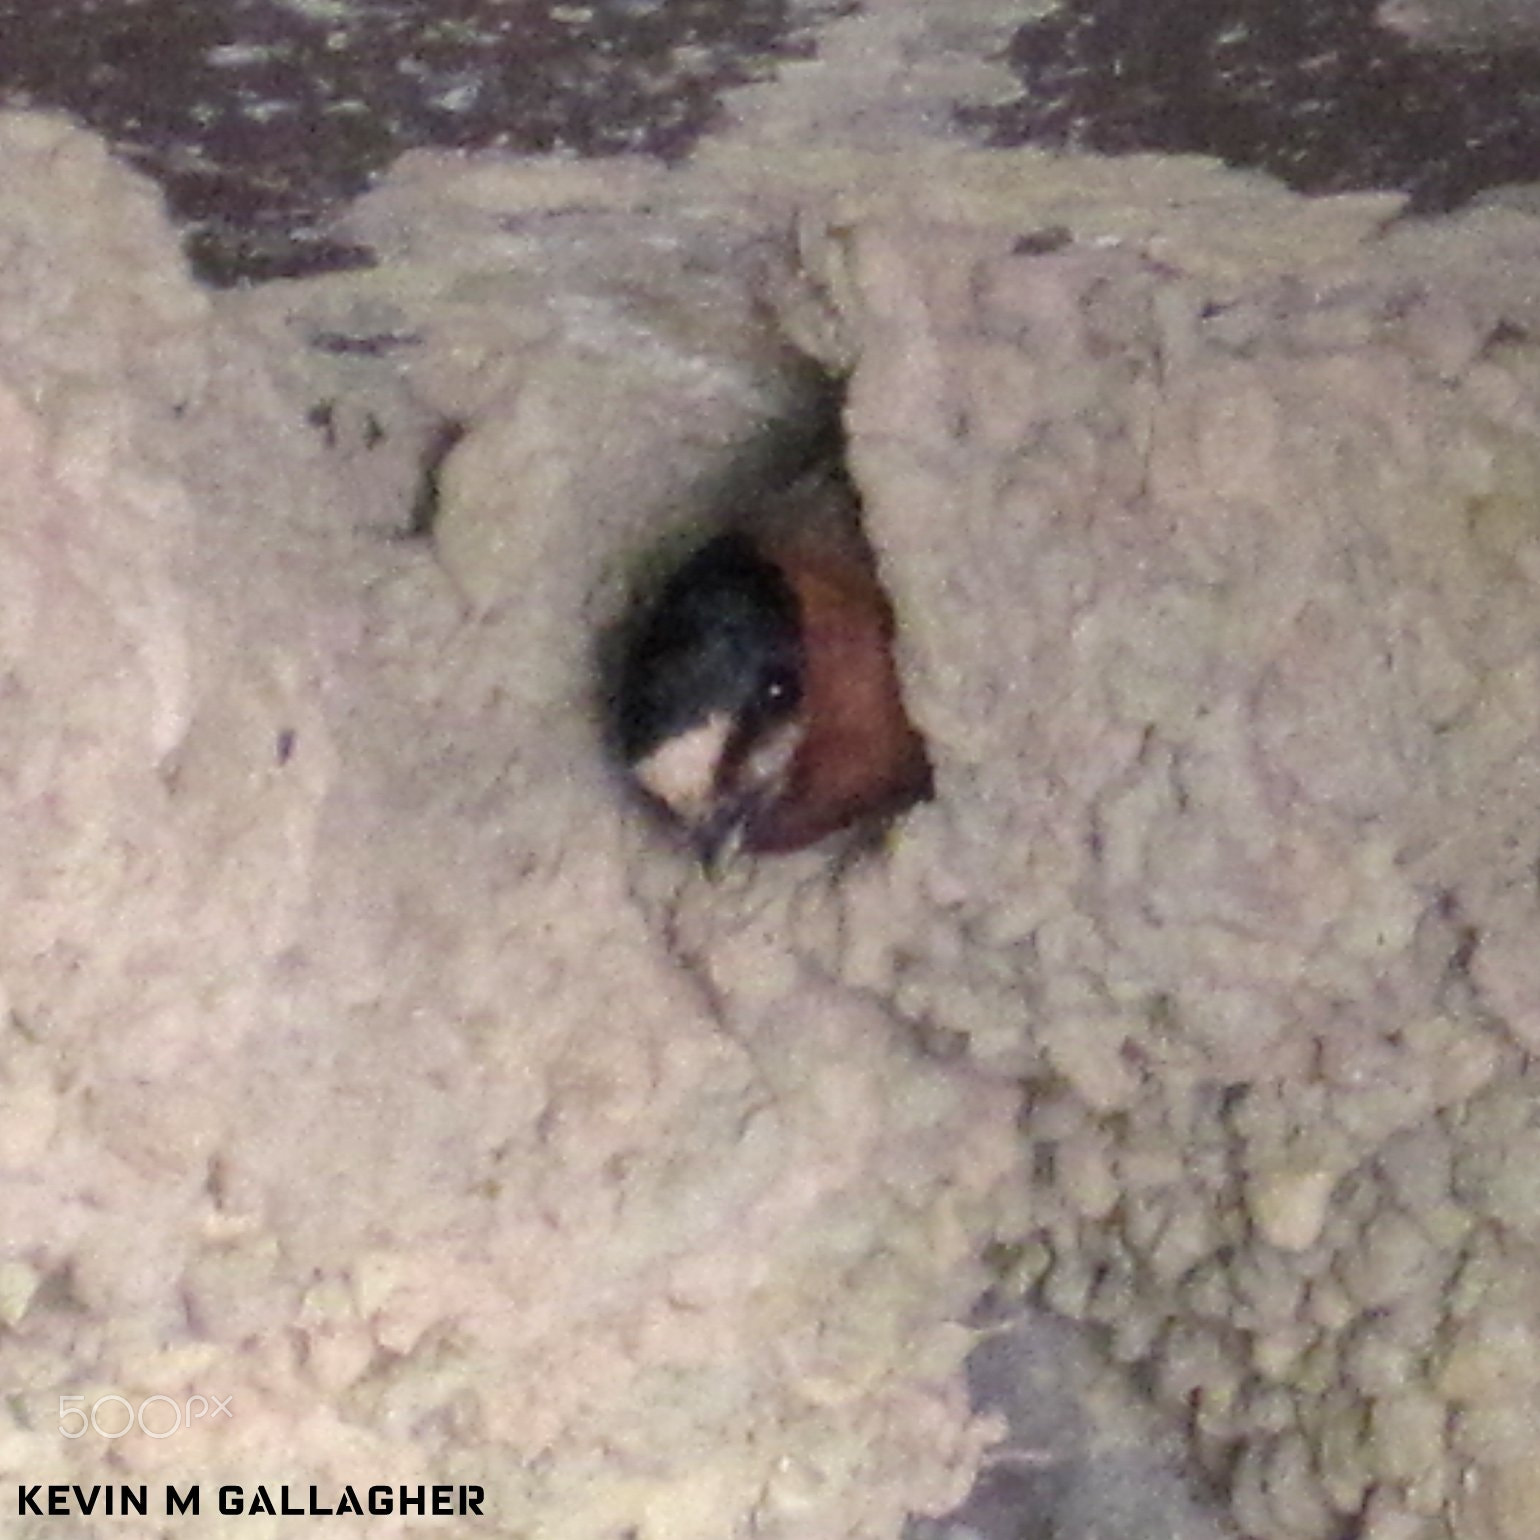 Canon PowerShot SD1200 IS (Digital IXUS 95 IS / IXY Digital 110 IS) sample photo. Cliff swallow in mud nest o photography